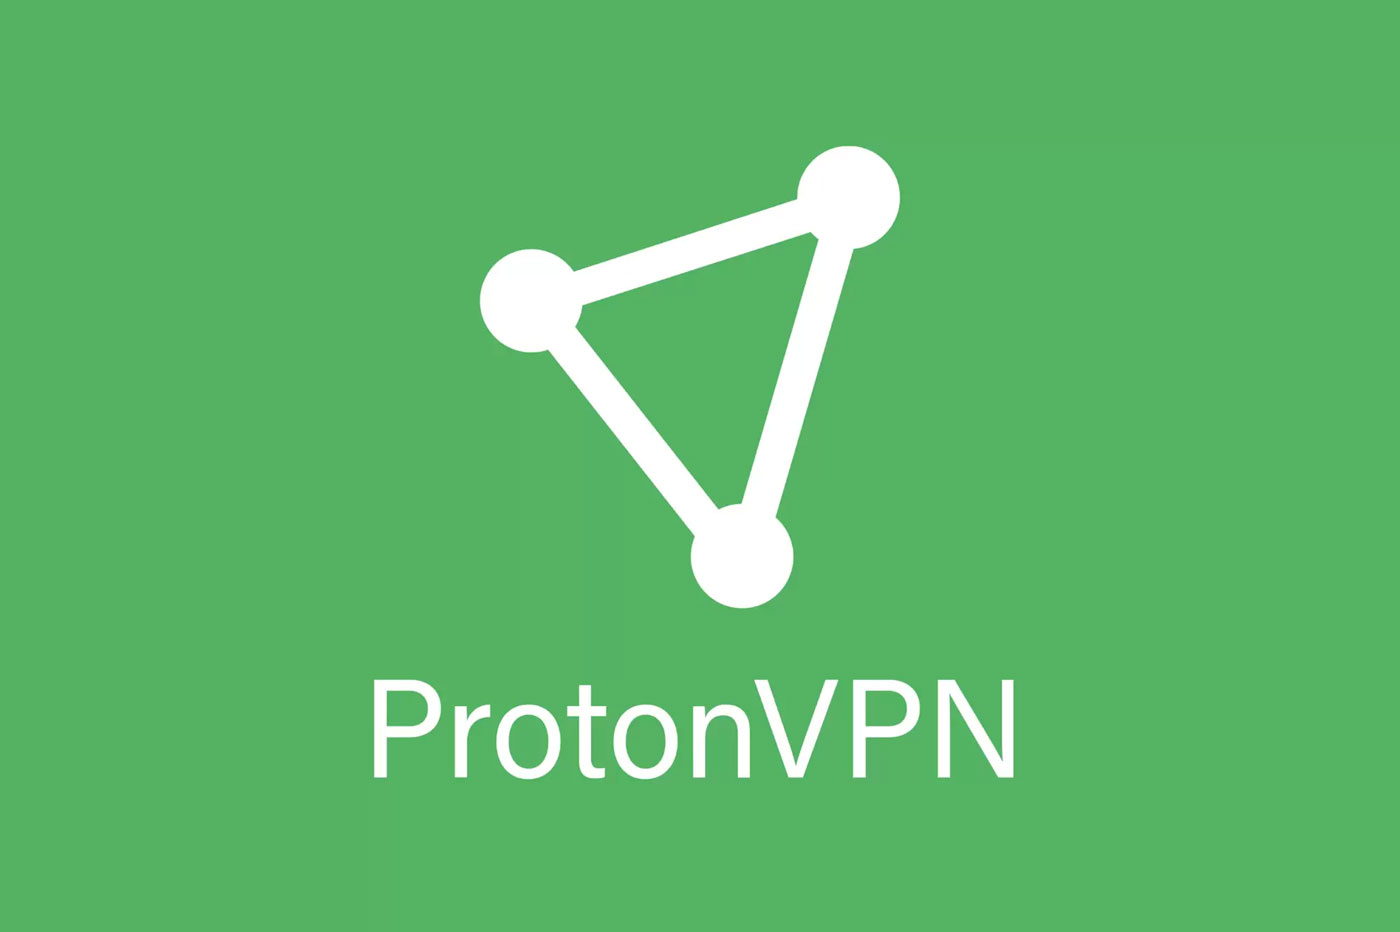 ProtonVPN - Best for unlimited use